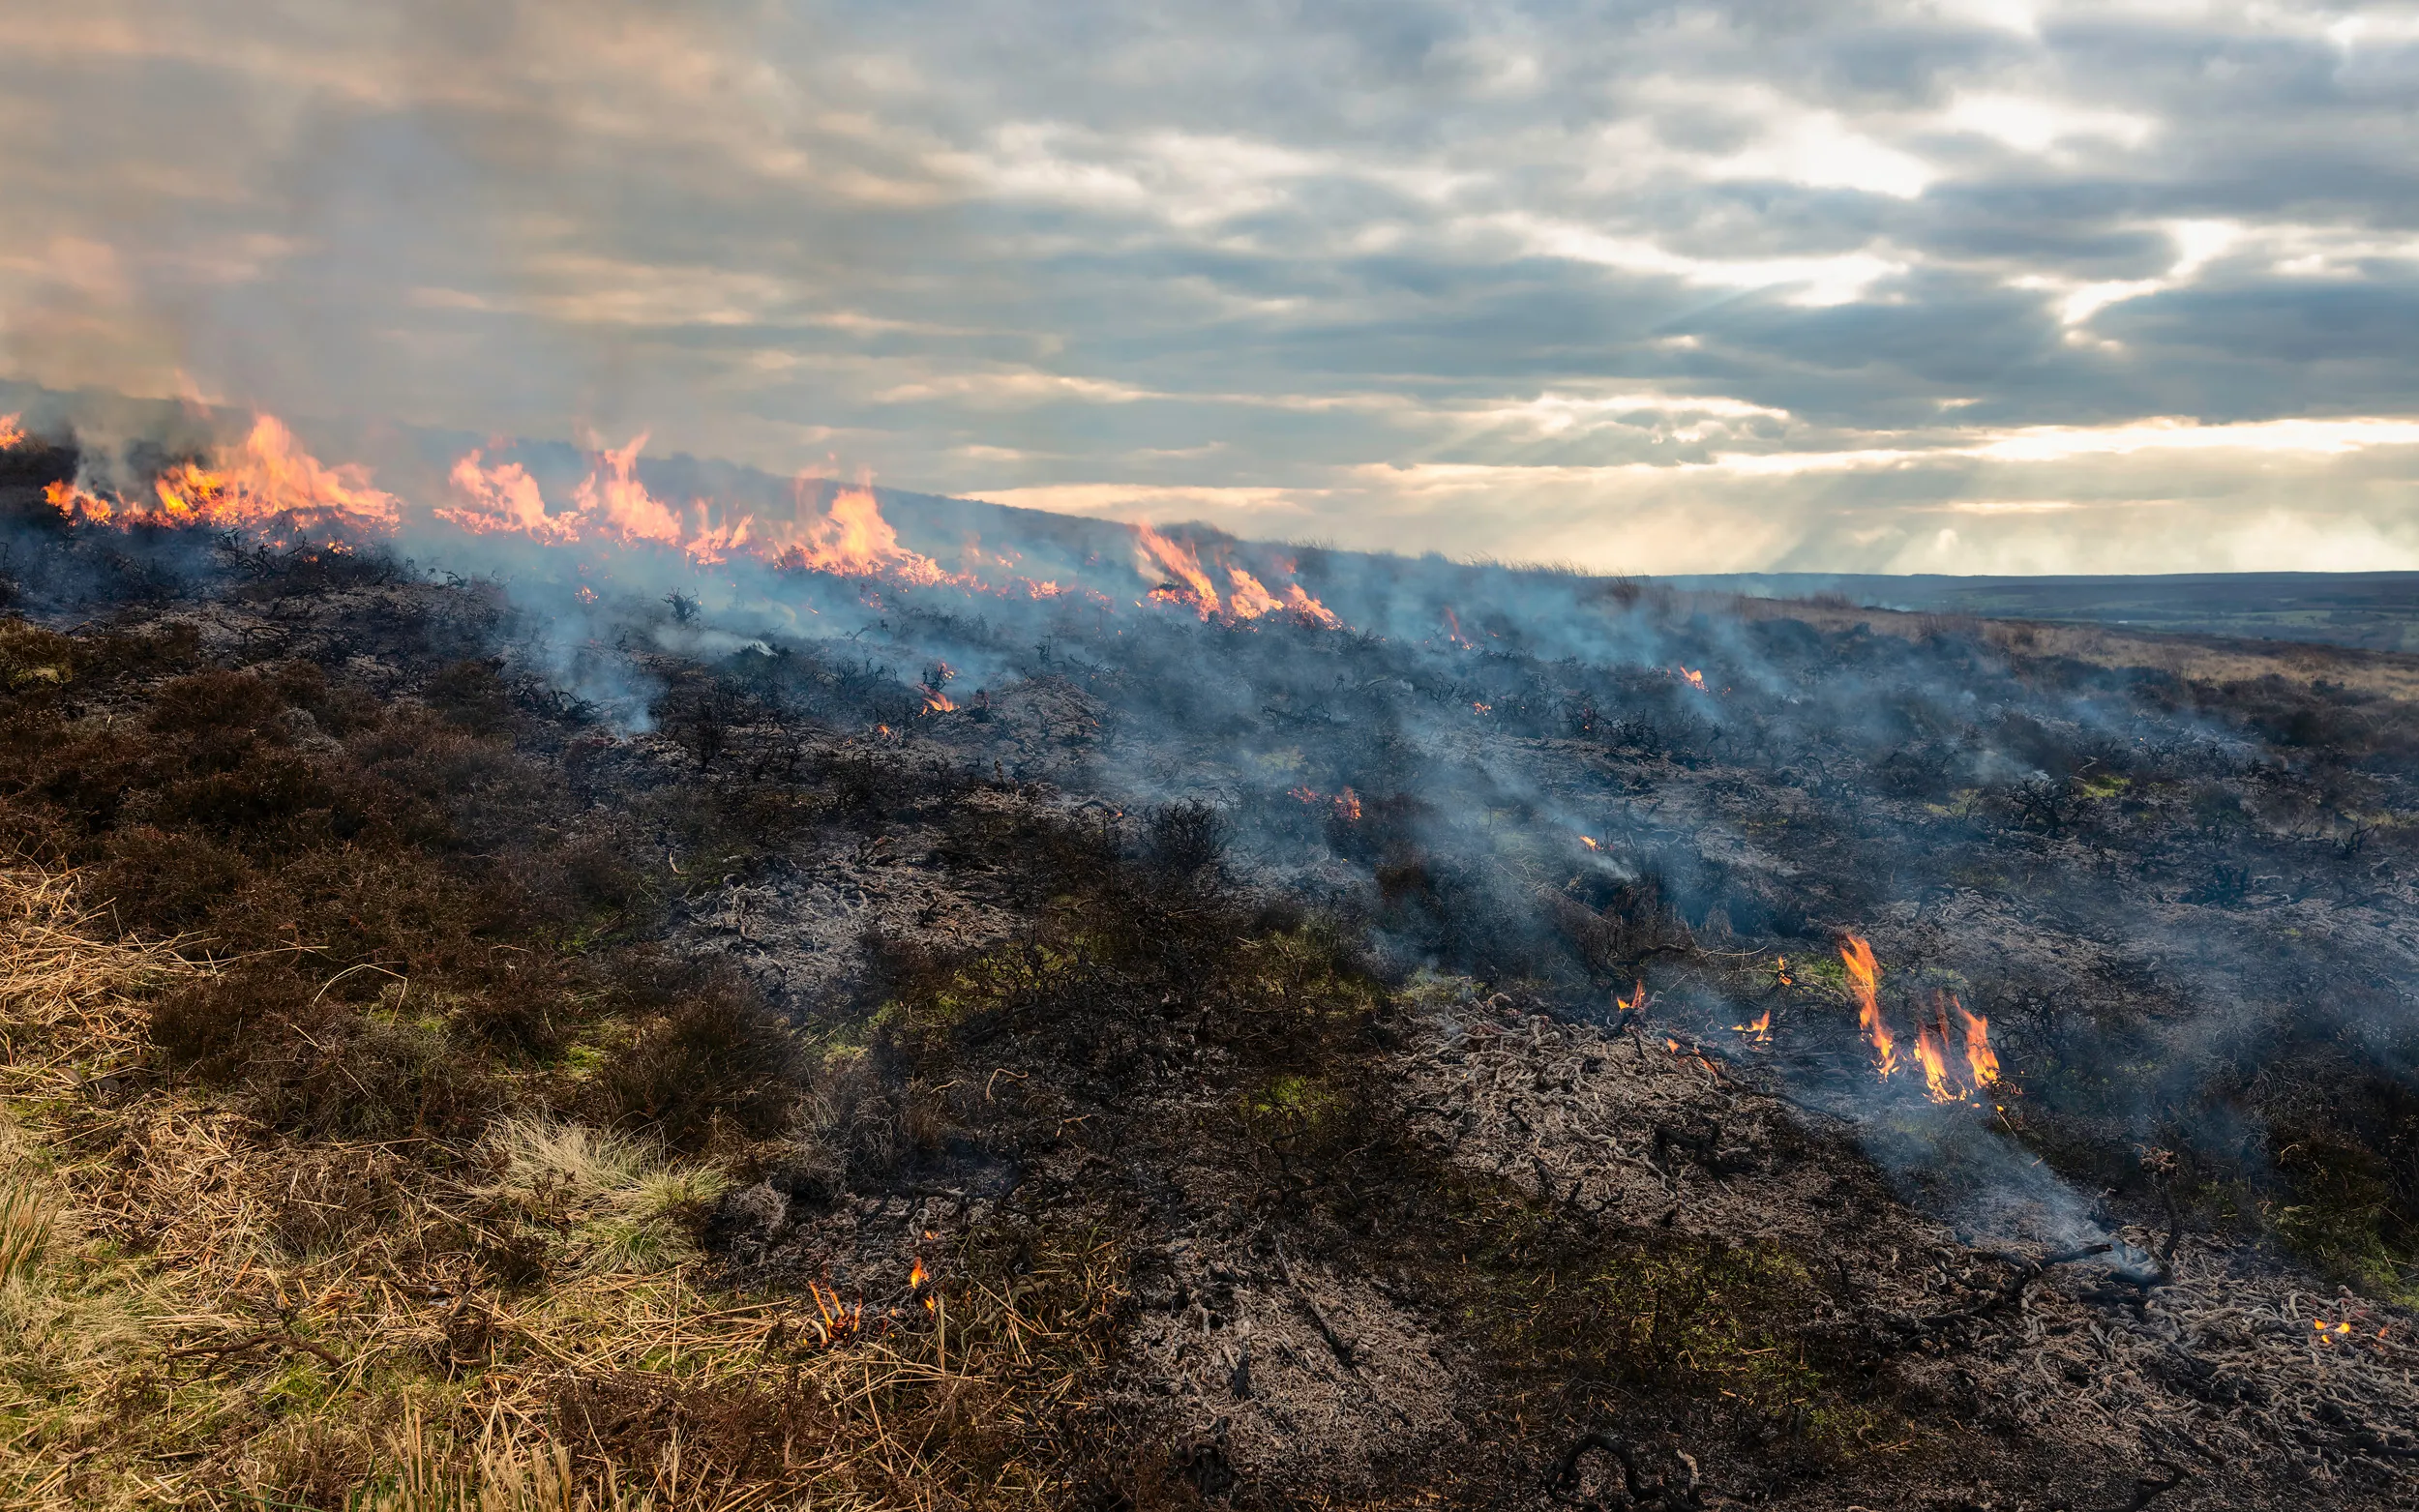 A view of the heathland at the North York Moors engulfed in flames.